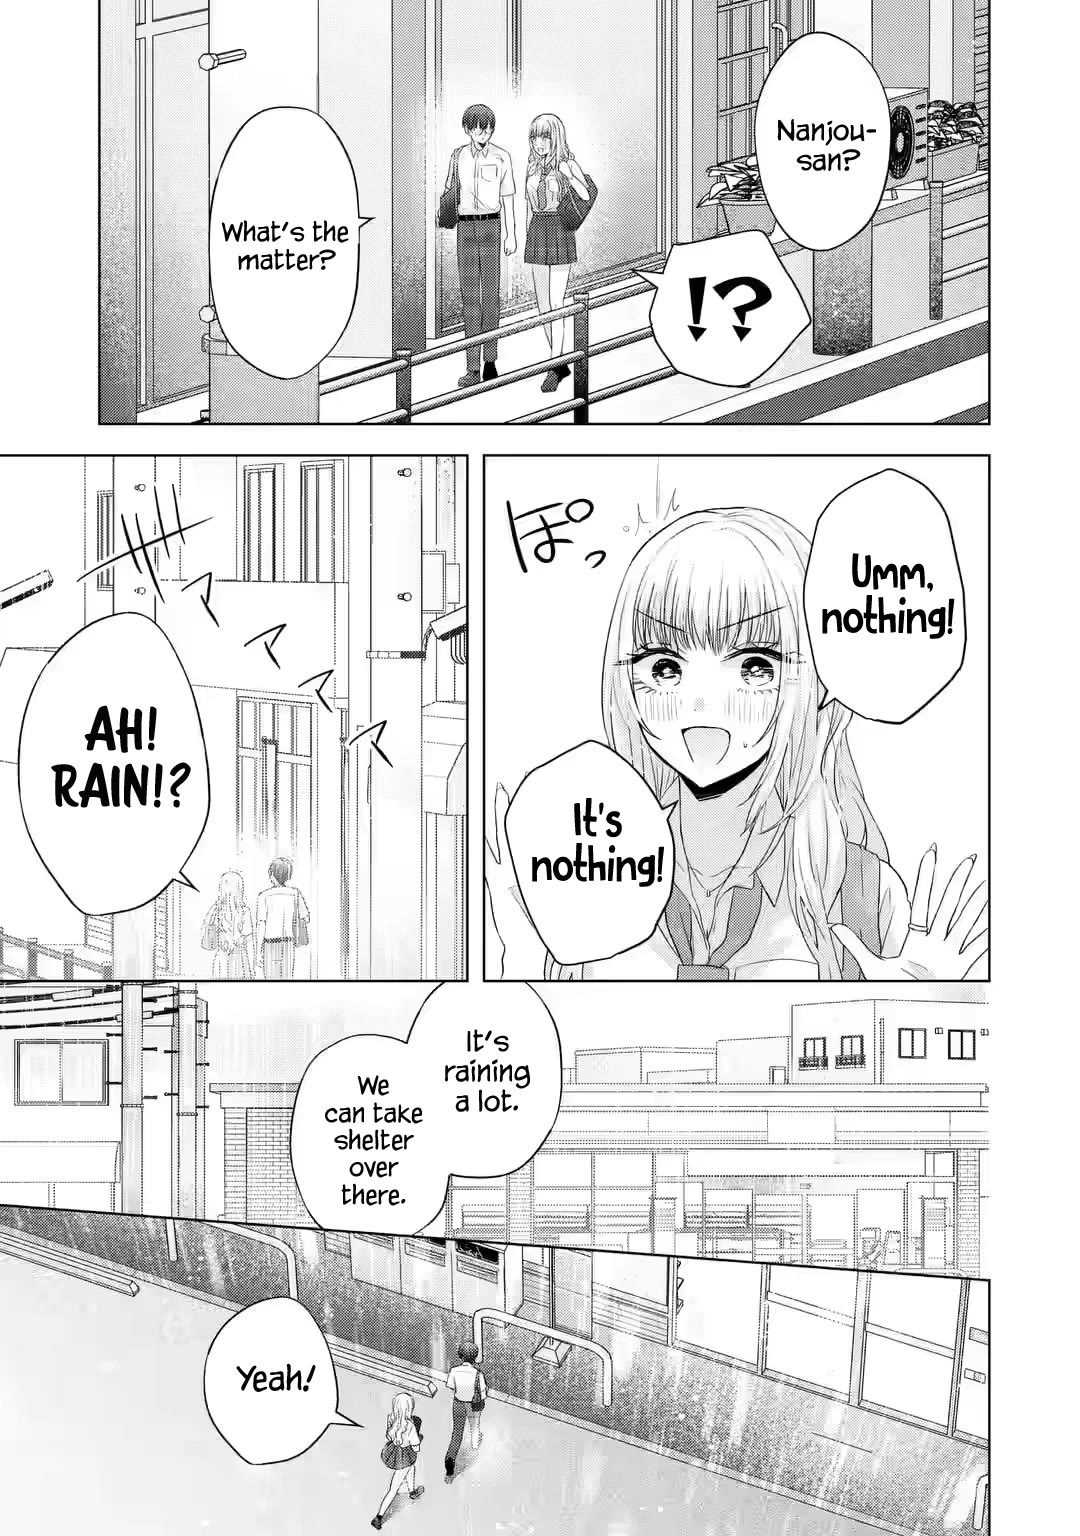 Nanjou-san Wants to Be Held by Me - chapter 7 - #4